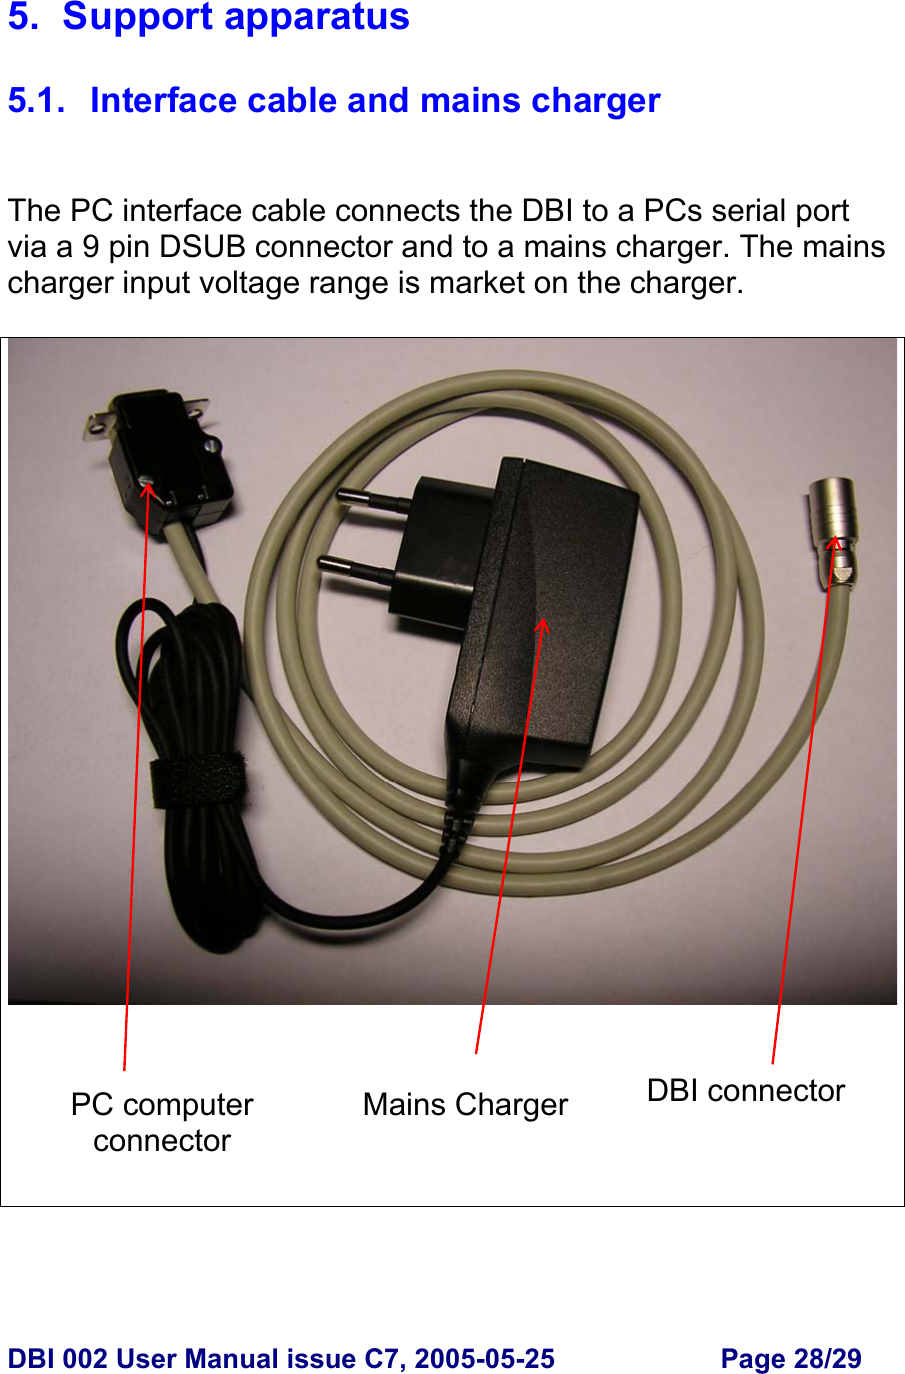  DBI 002 User Manual issue C7, 2005-05-25  Page 28/29  5. Support apparatus  5.1.  Interface cable and mains charger   The PC interface cable connects the DBI to a PCs serial port via a 9 pin DSUB connector and to a mains charger. The mains charger input voltage range is market on the charger.   DBI connectorMains Charger PC computer connector 